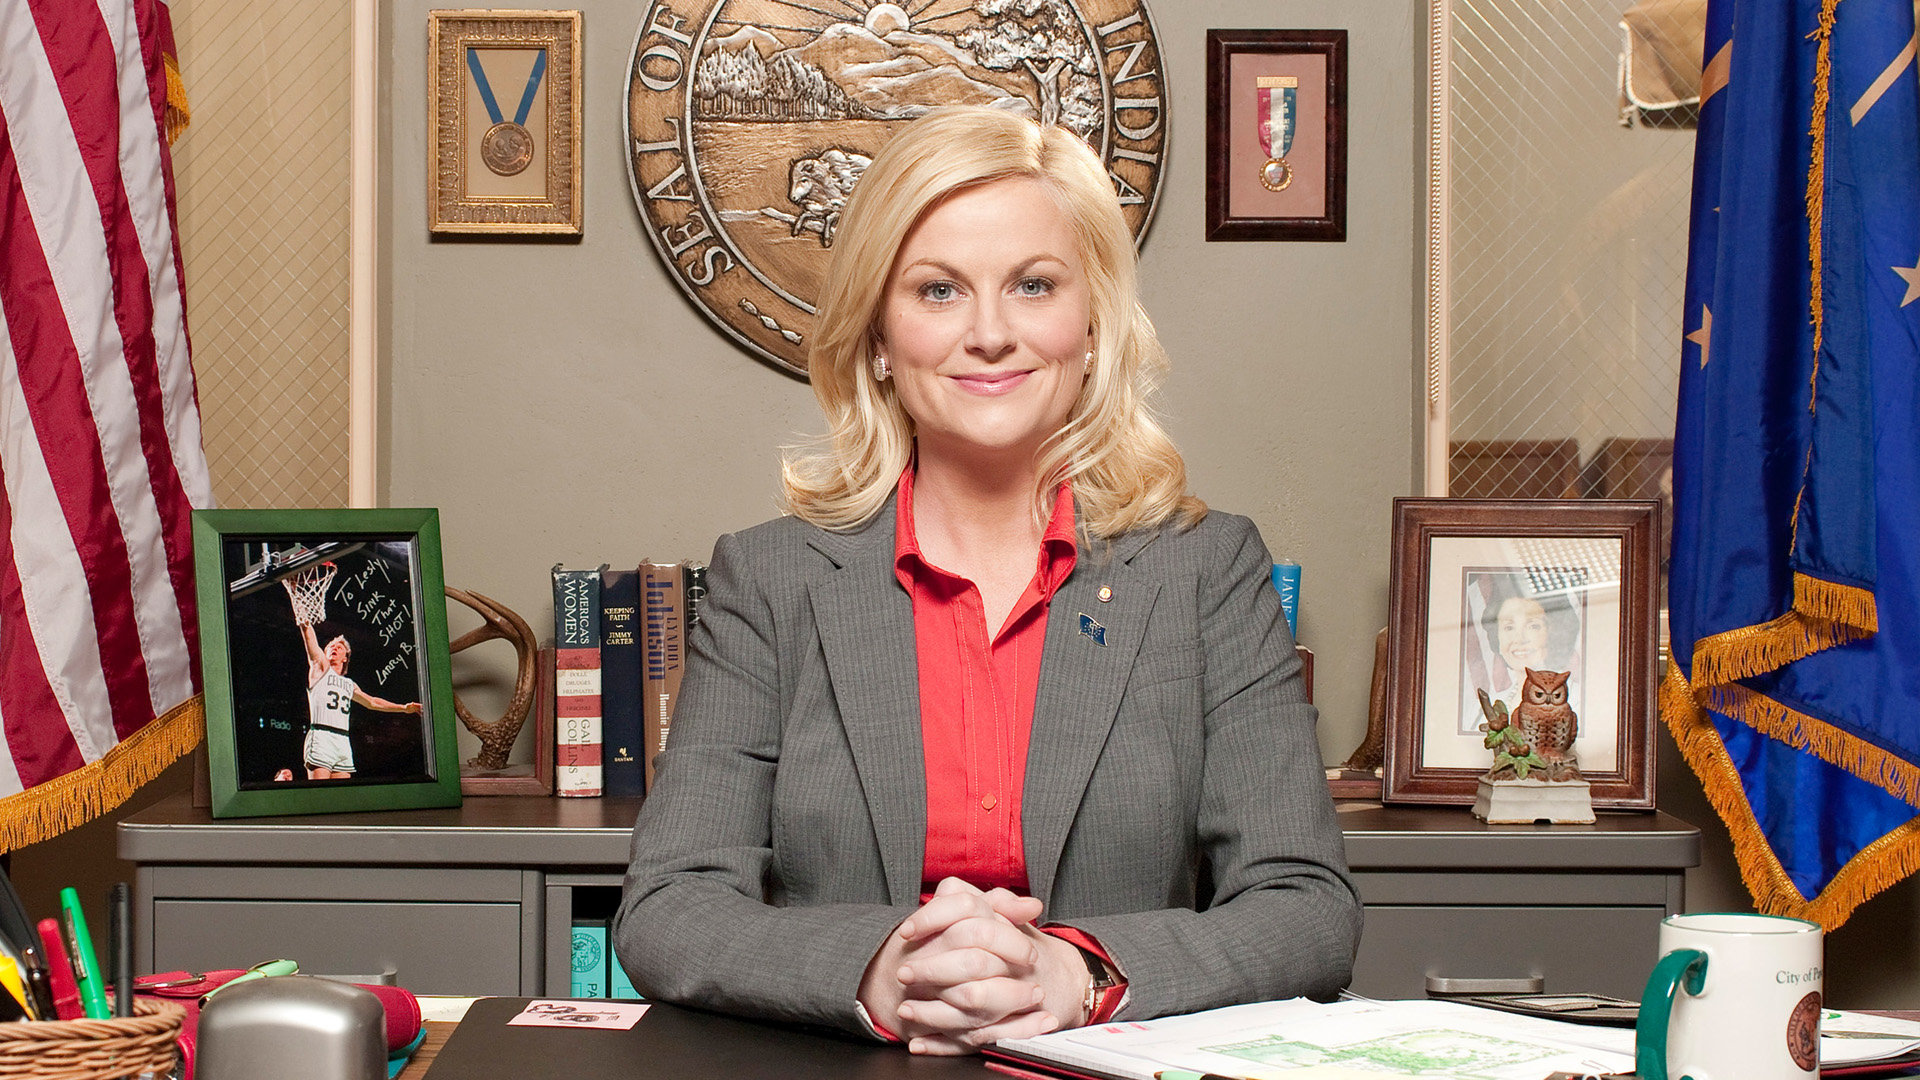 Parks And Recreation wallpapers 1920x1080 Full HD (1080p) desktop backgrounds